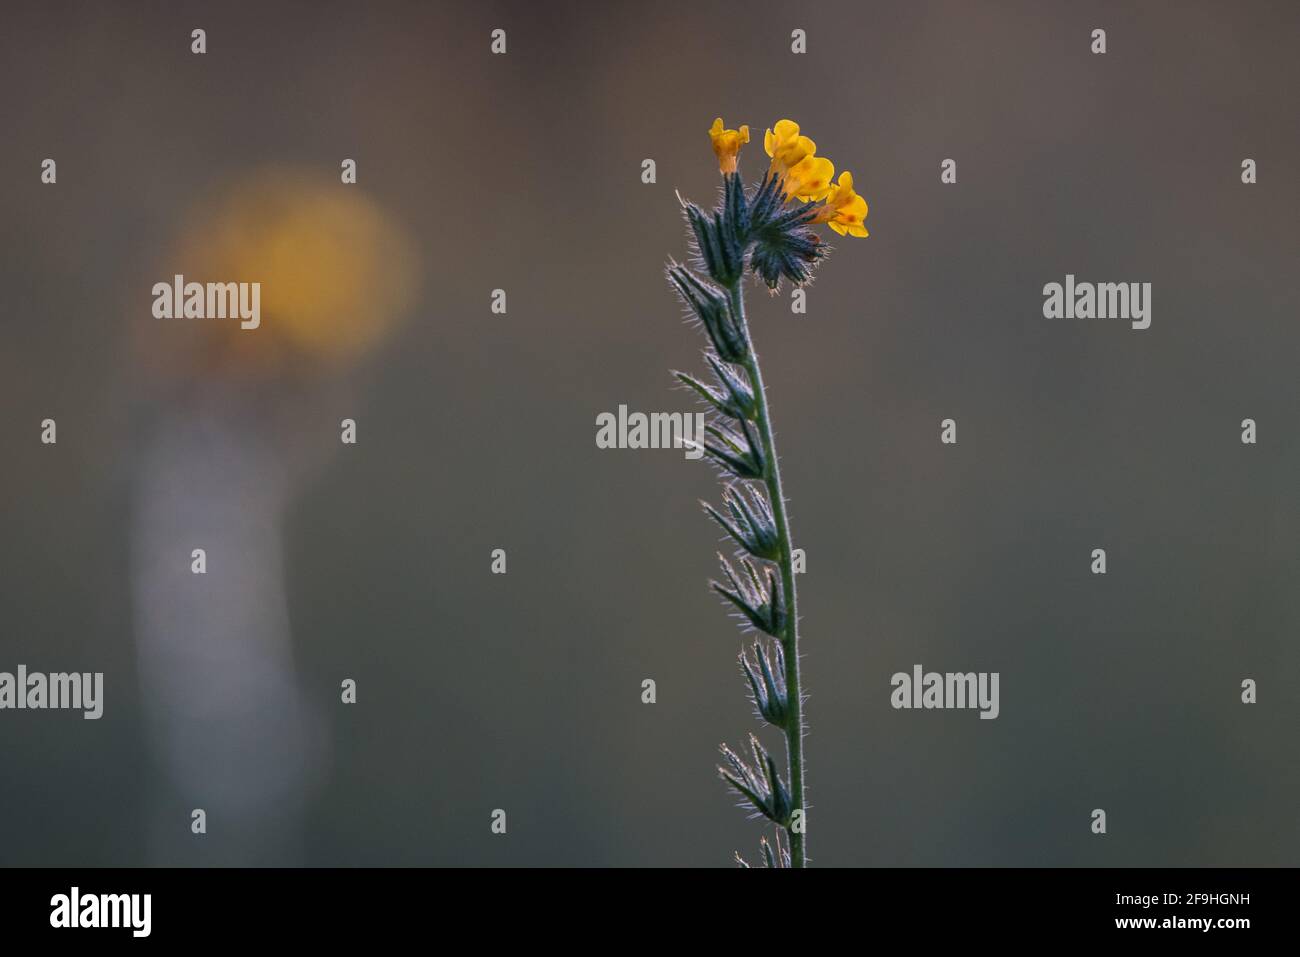 A common fiddleneck wildflower (Amsinckia intermedia) growing wild and blooming in a grassland in Central California. Stock Photo